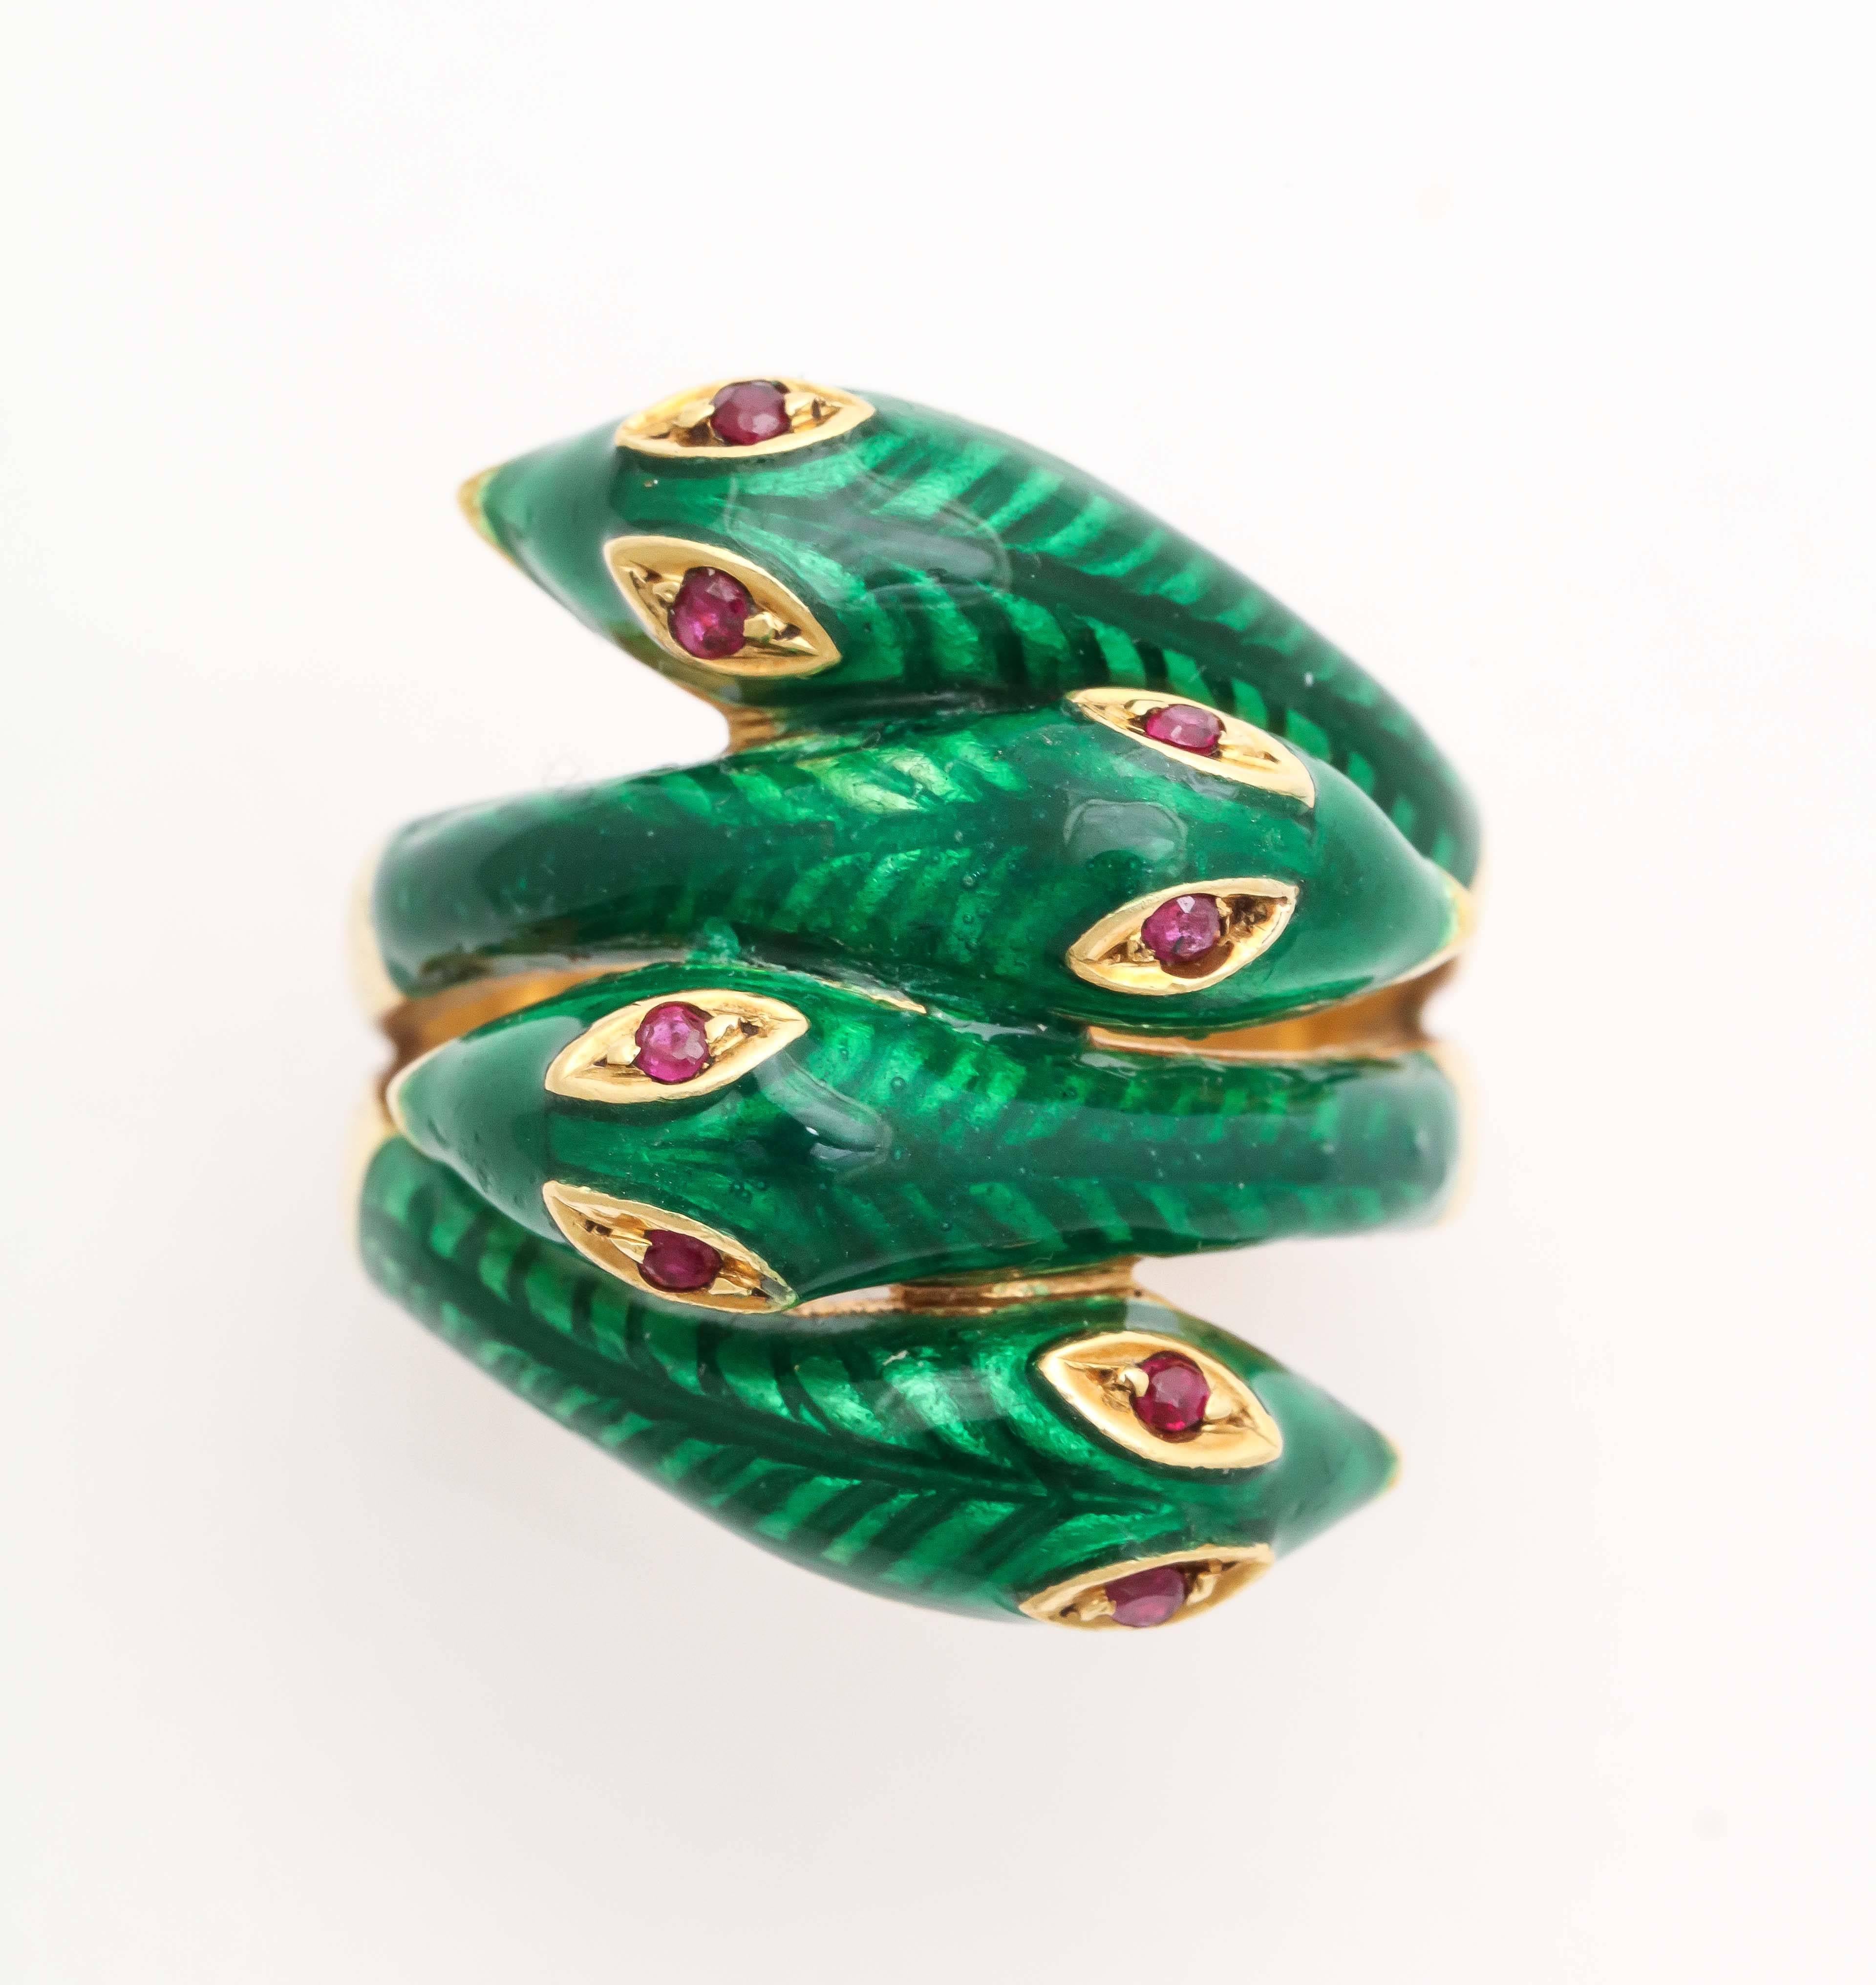 Very unusual 18kt French Green enamel snake Ring with 4 heads & Ruby eyes.  Highly unusual!  Bears French hallmarks on the outer band.  Can be sized - as enamel doesn't go all the way around - making it more versatile.  Size 4 3/4. Way to go!

